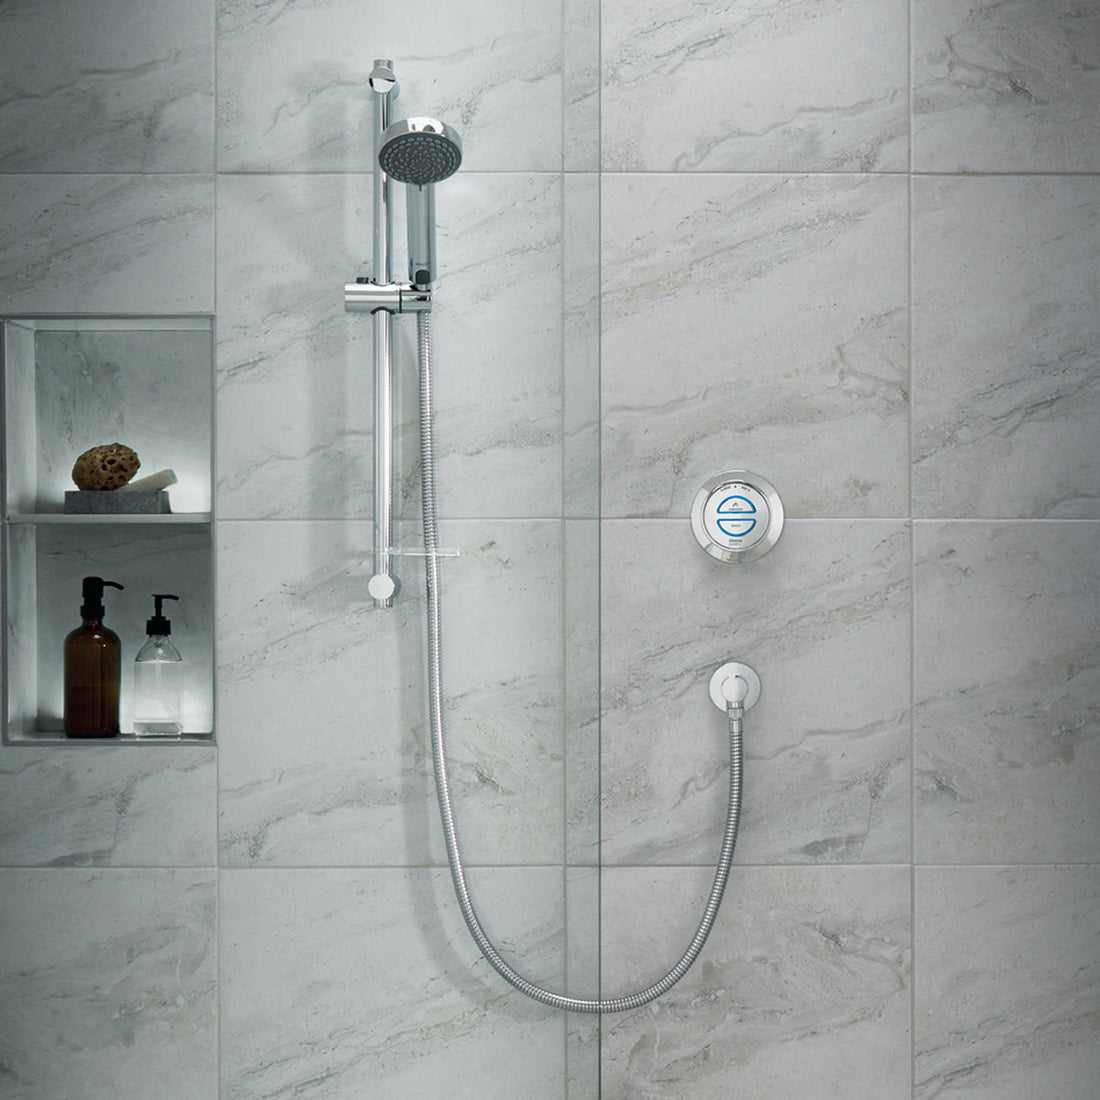 Aqualisa Quartz Classic Smart Shower - Concealed With Adjustable Head against white panel wall QZD.A1.BV.20